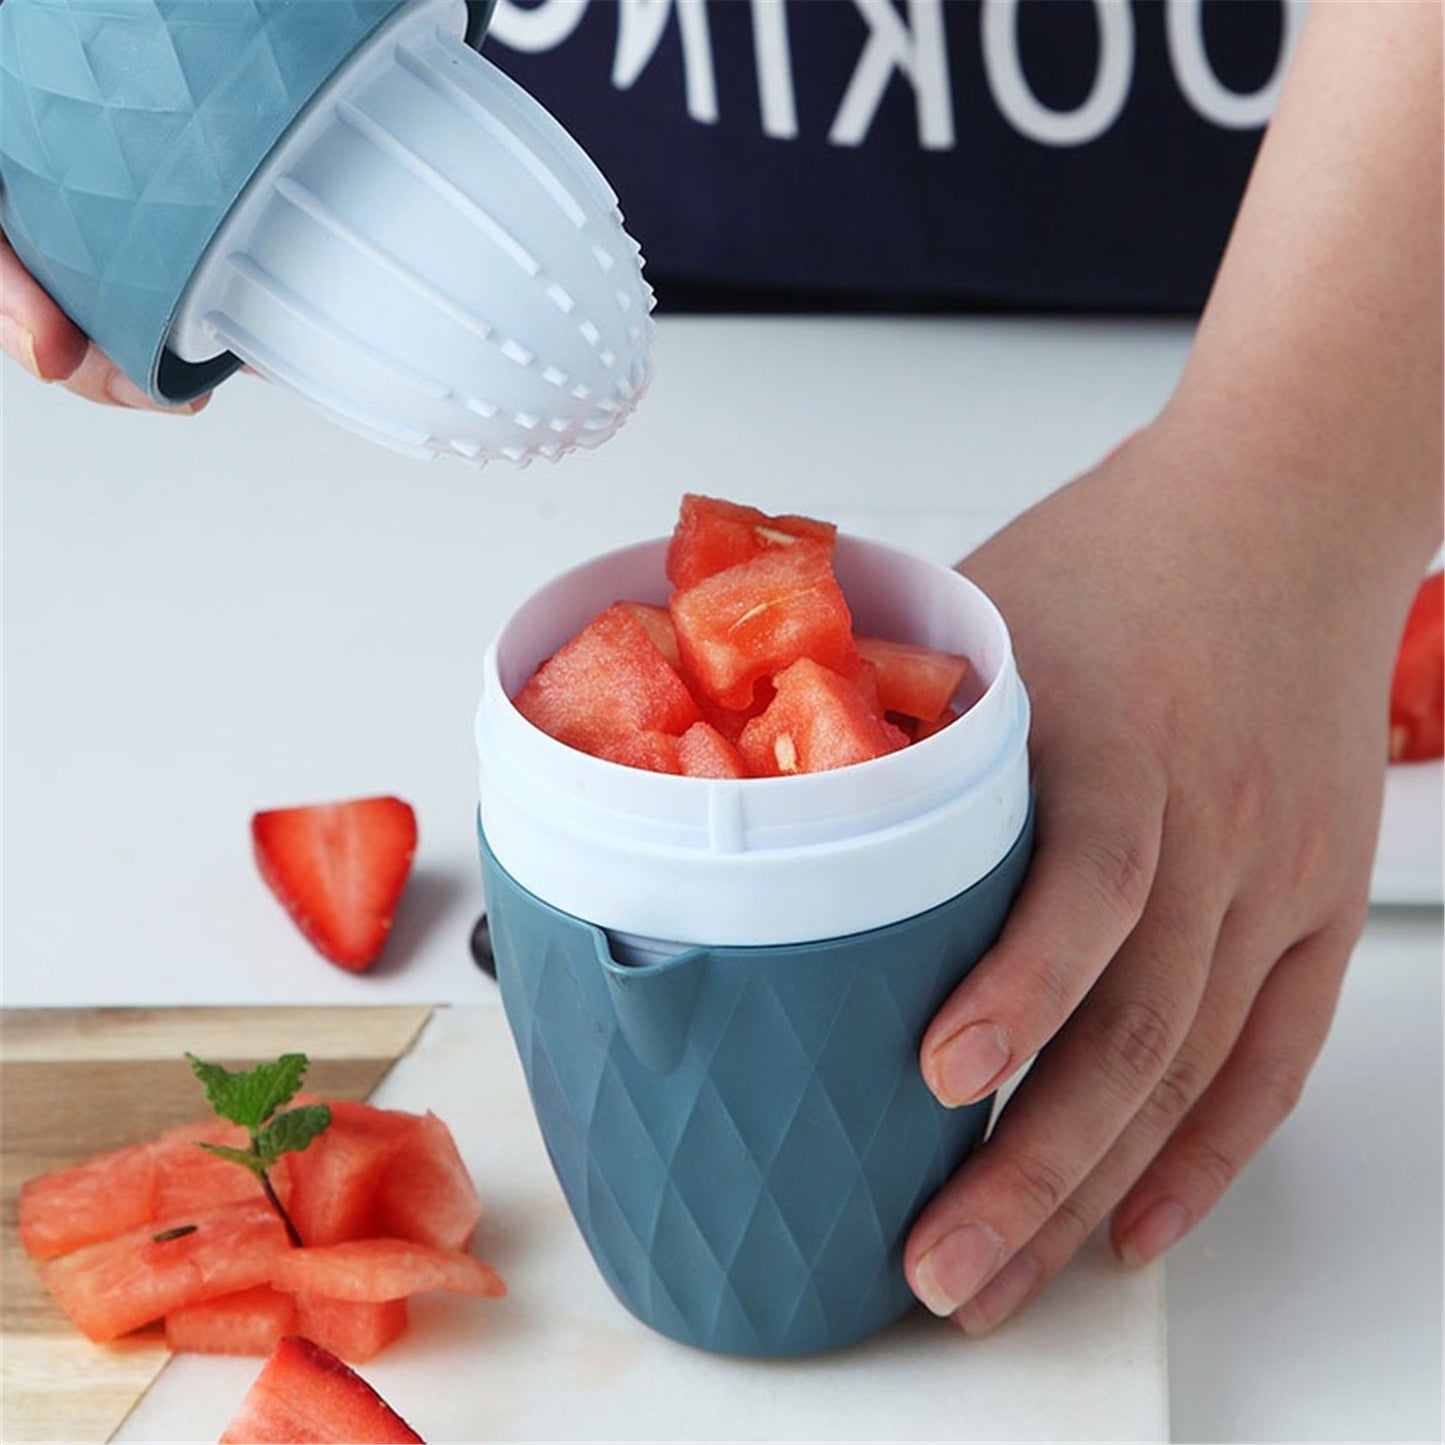 Simple Manual Juicer Small Portable Squeezer